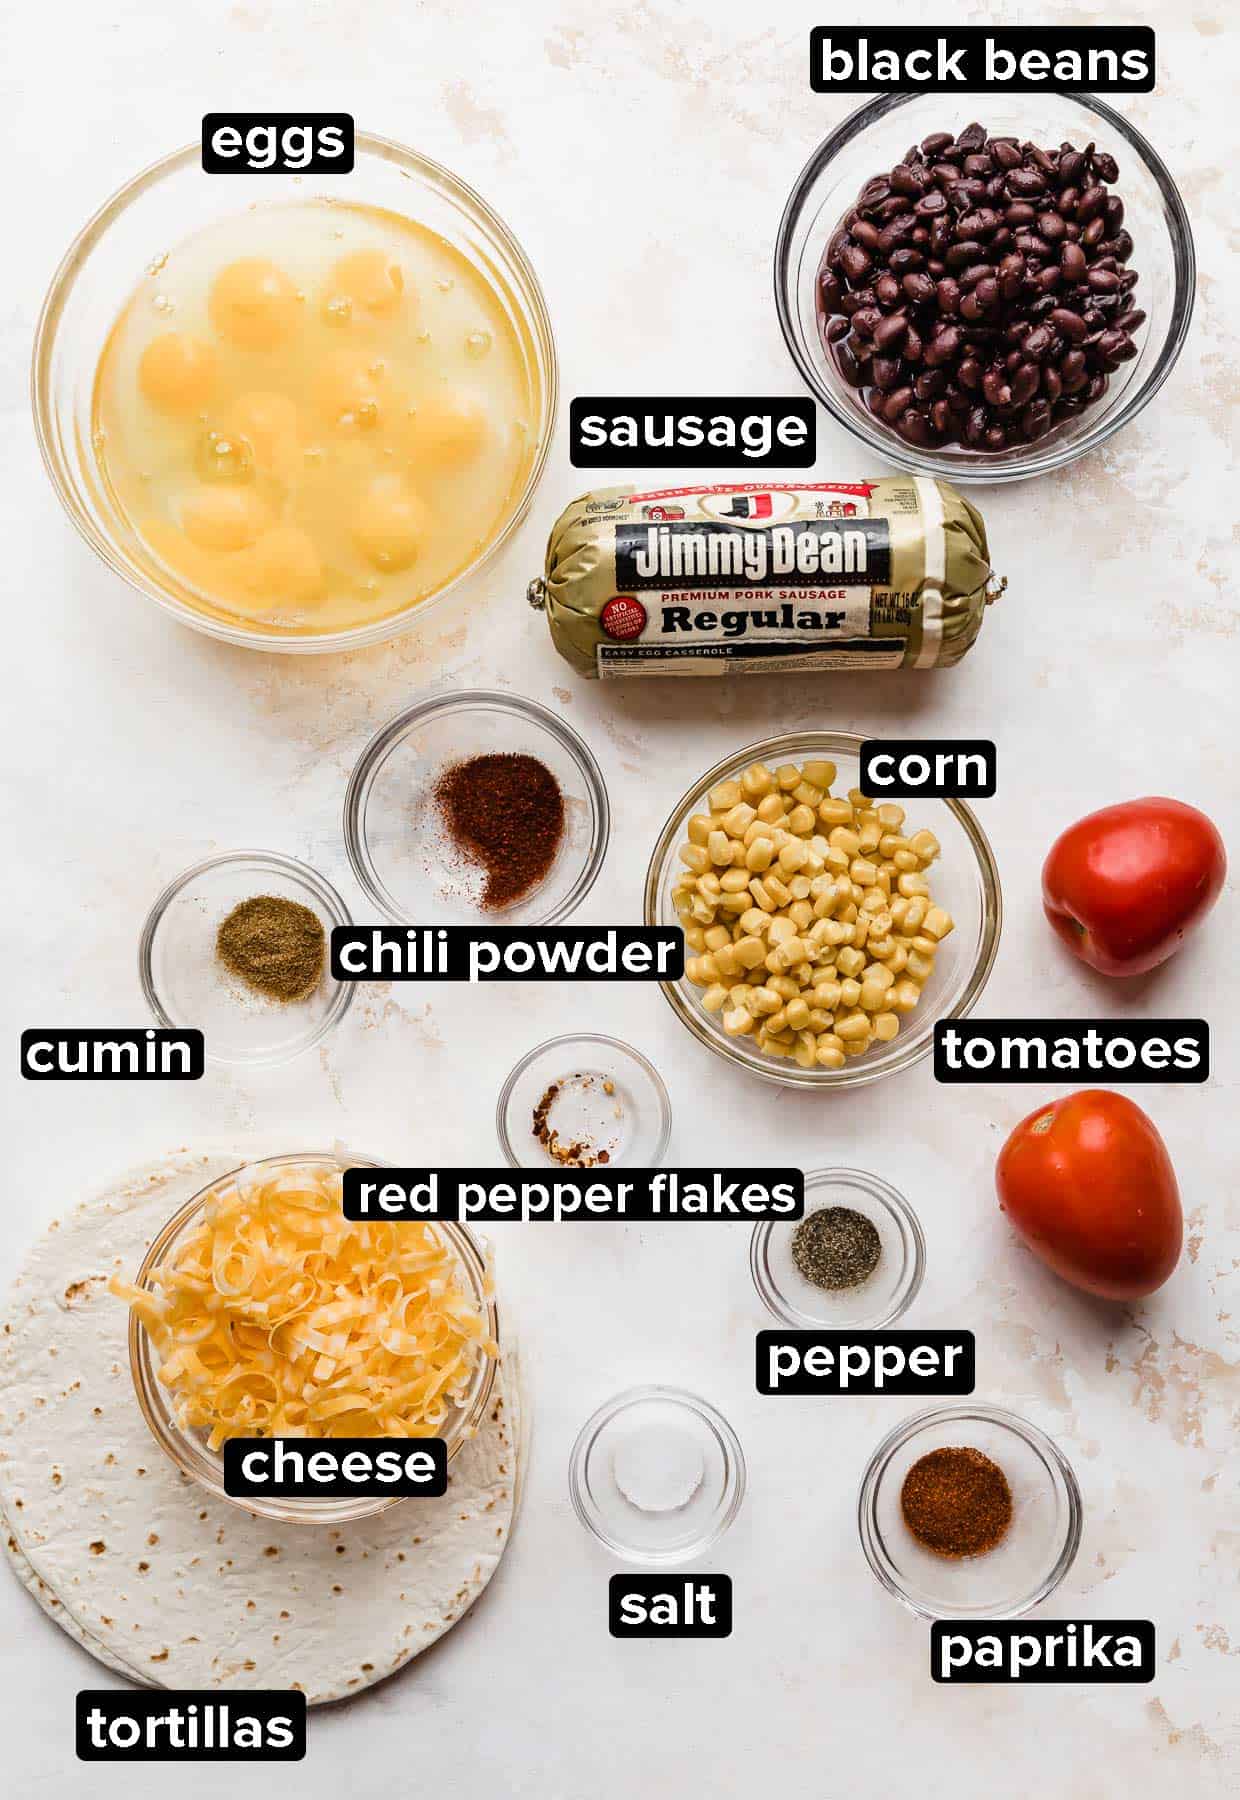 Ingredients used to make Breakfast Burrito with Black Beans and egg and sausage, portioned into glass bowls on a white textured background.